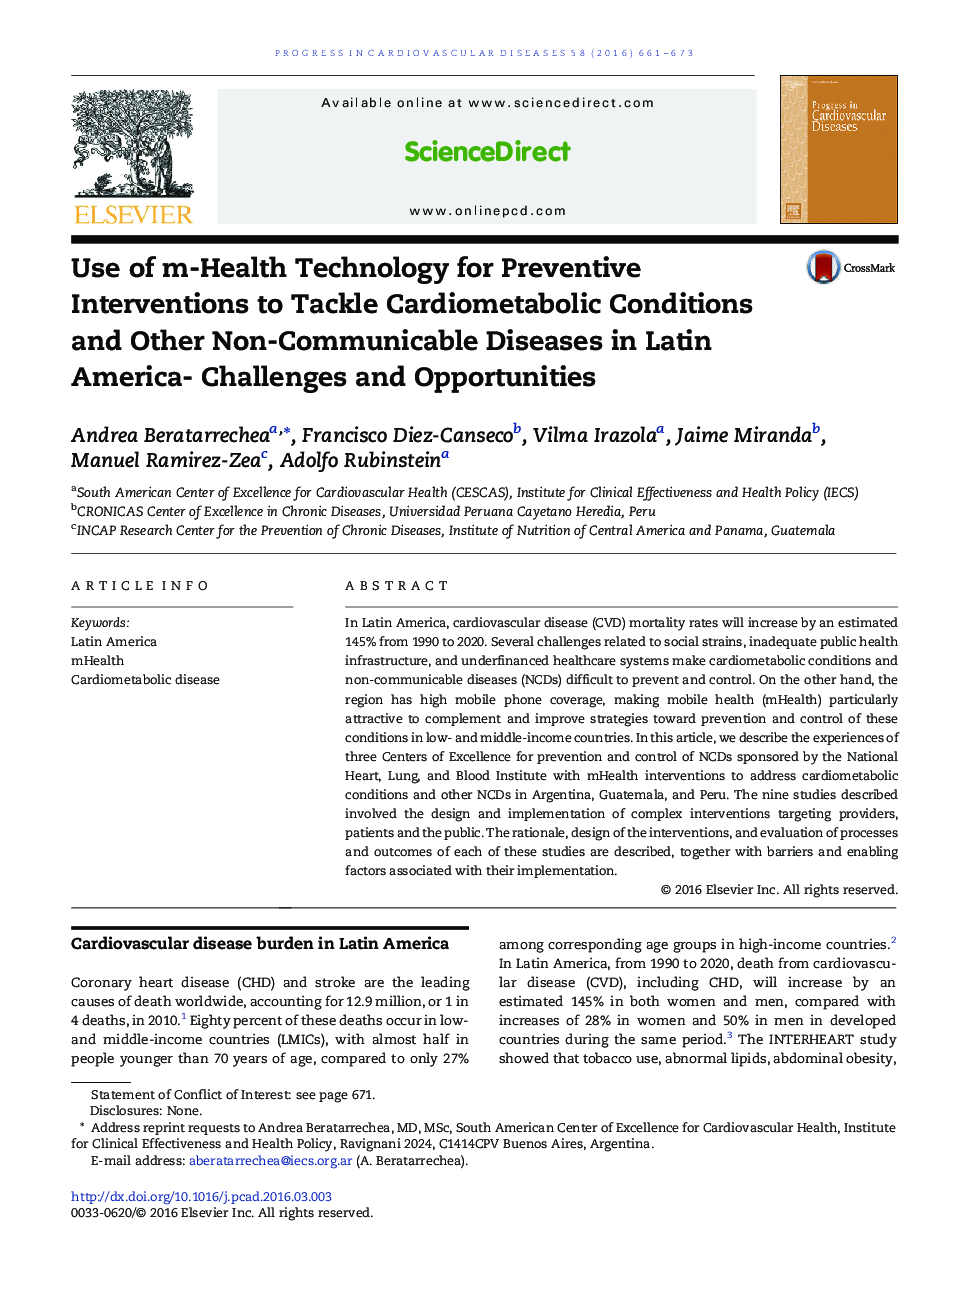 Use of m-Health Technology for Preventive Interventions to Tackle Cardiometabolic Conditions and Other Non-Communicable Diseases in Latin America- Challenges and Opportunities 